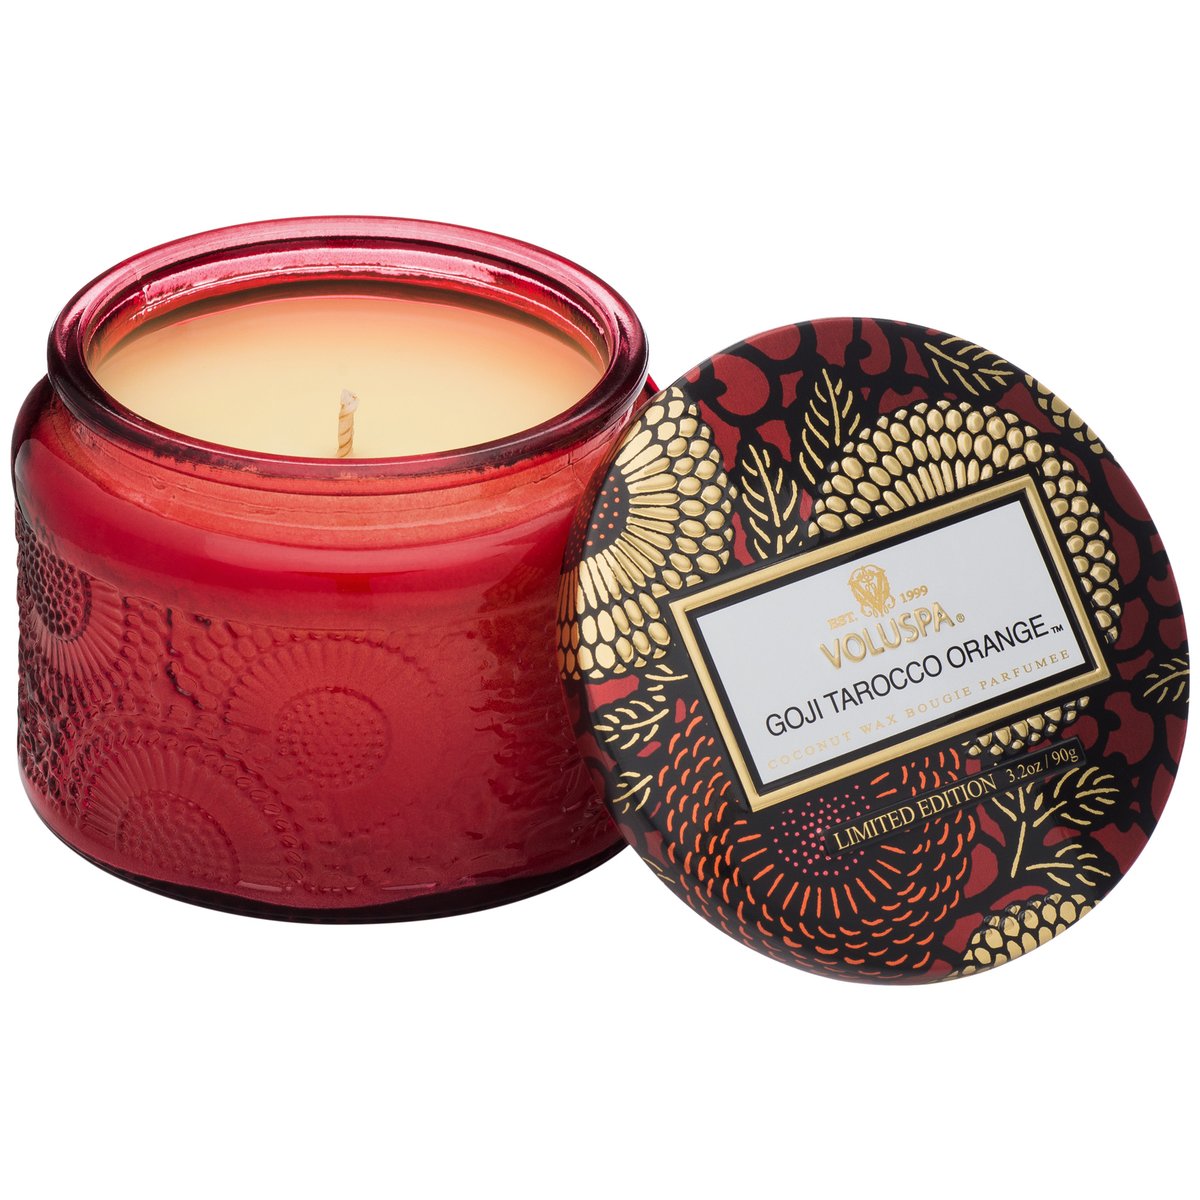 Notes of Goji Berry, Ripe Mango & Tarocco Orange.This embossed candle features a metallic lid, making it perfect for travel and smaller spaces.